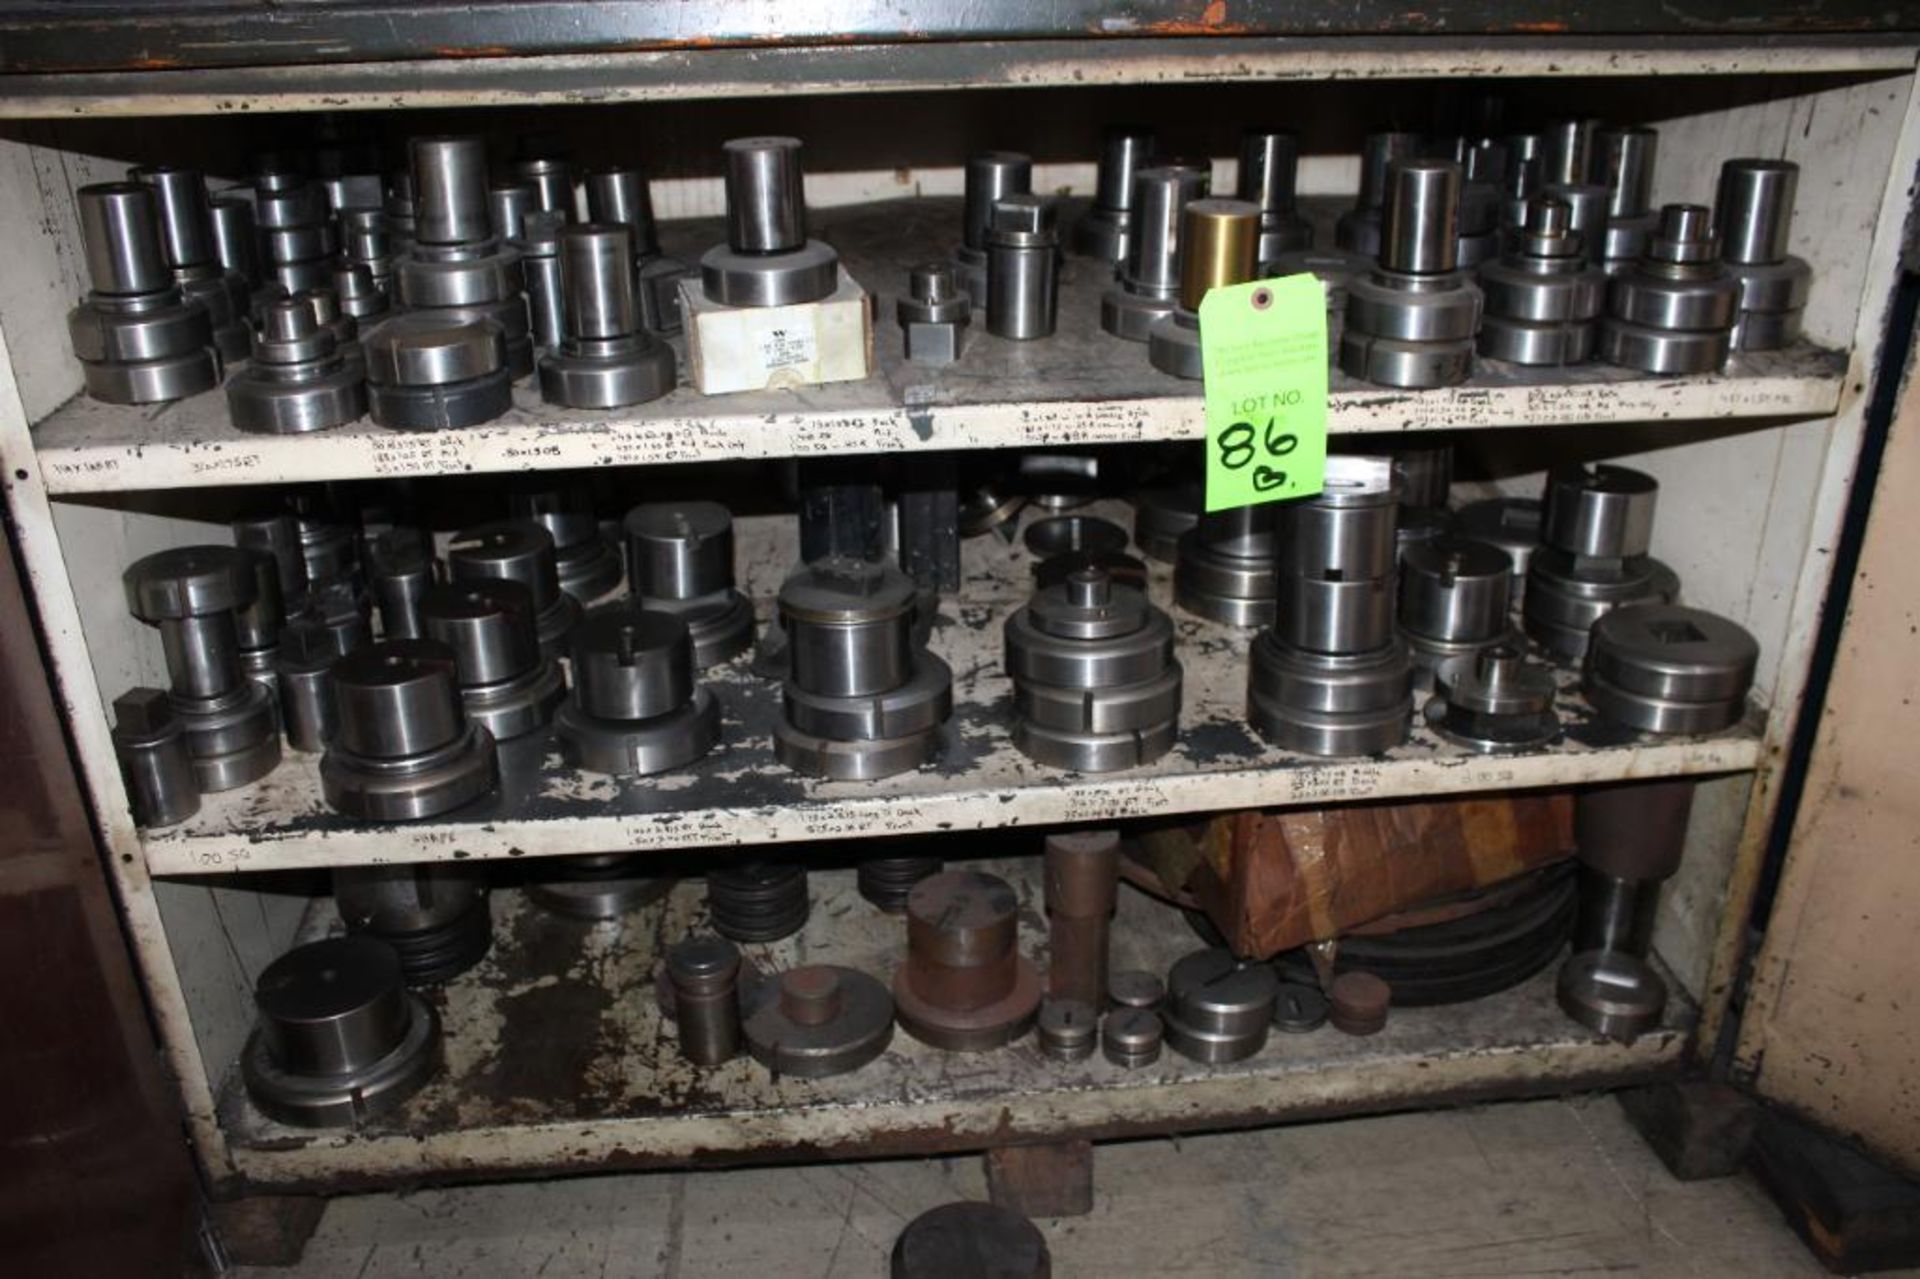 Contents of Cabinet- Assorted Amada Tooling